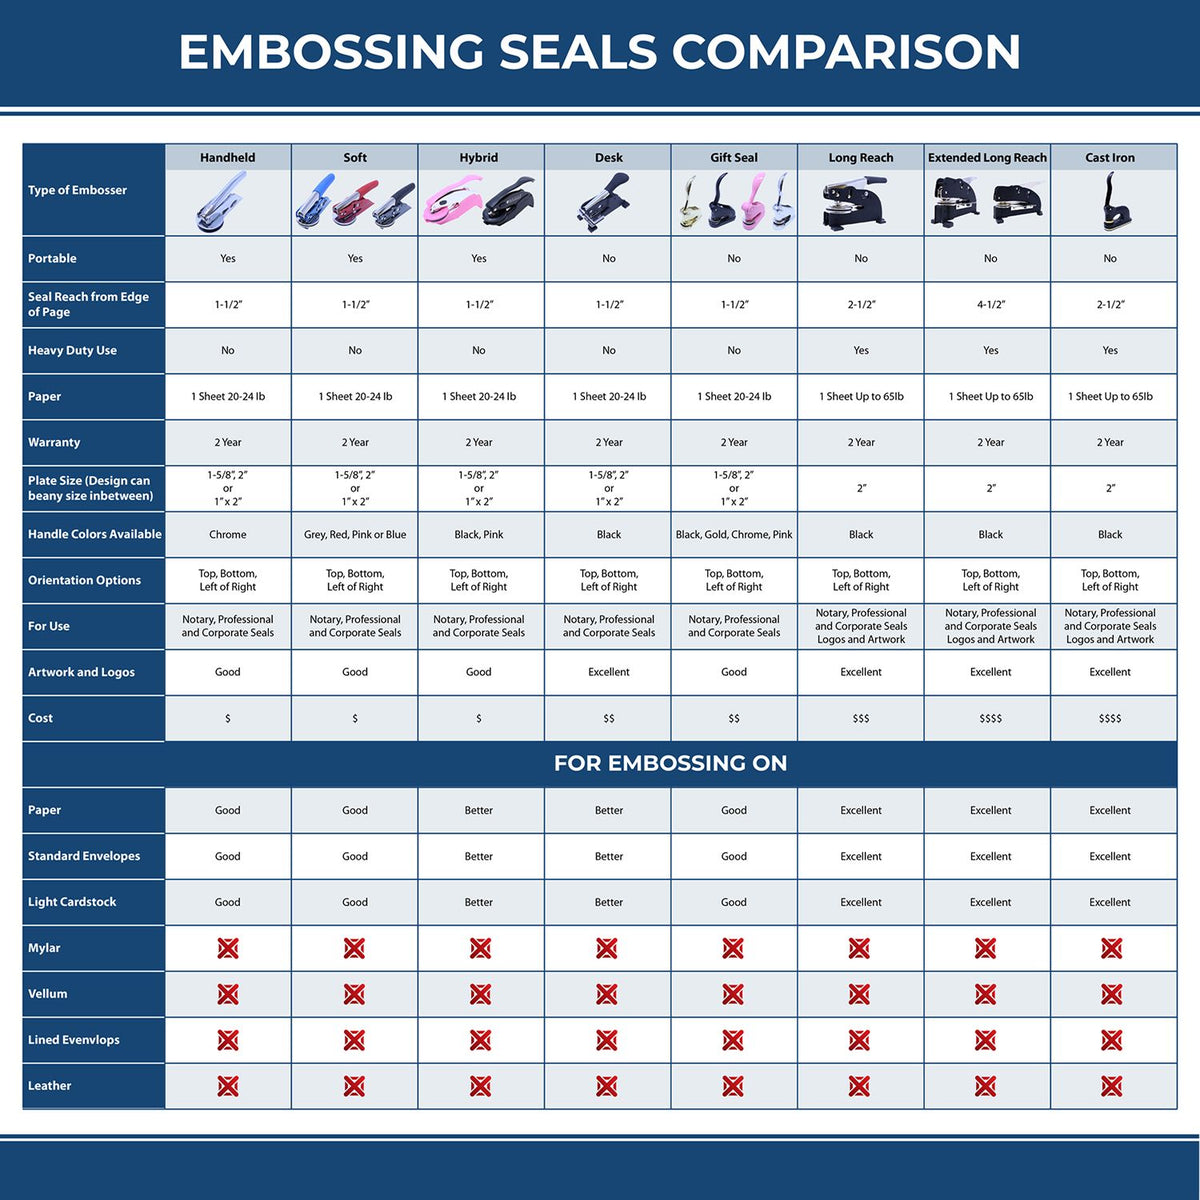 A comparison chart for the different types of mount models available for the Hybrid Mississippi Land Surveyor Seal